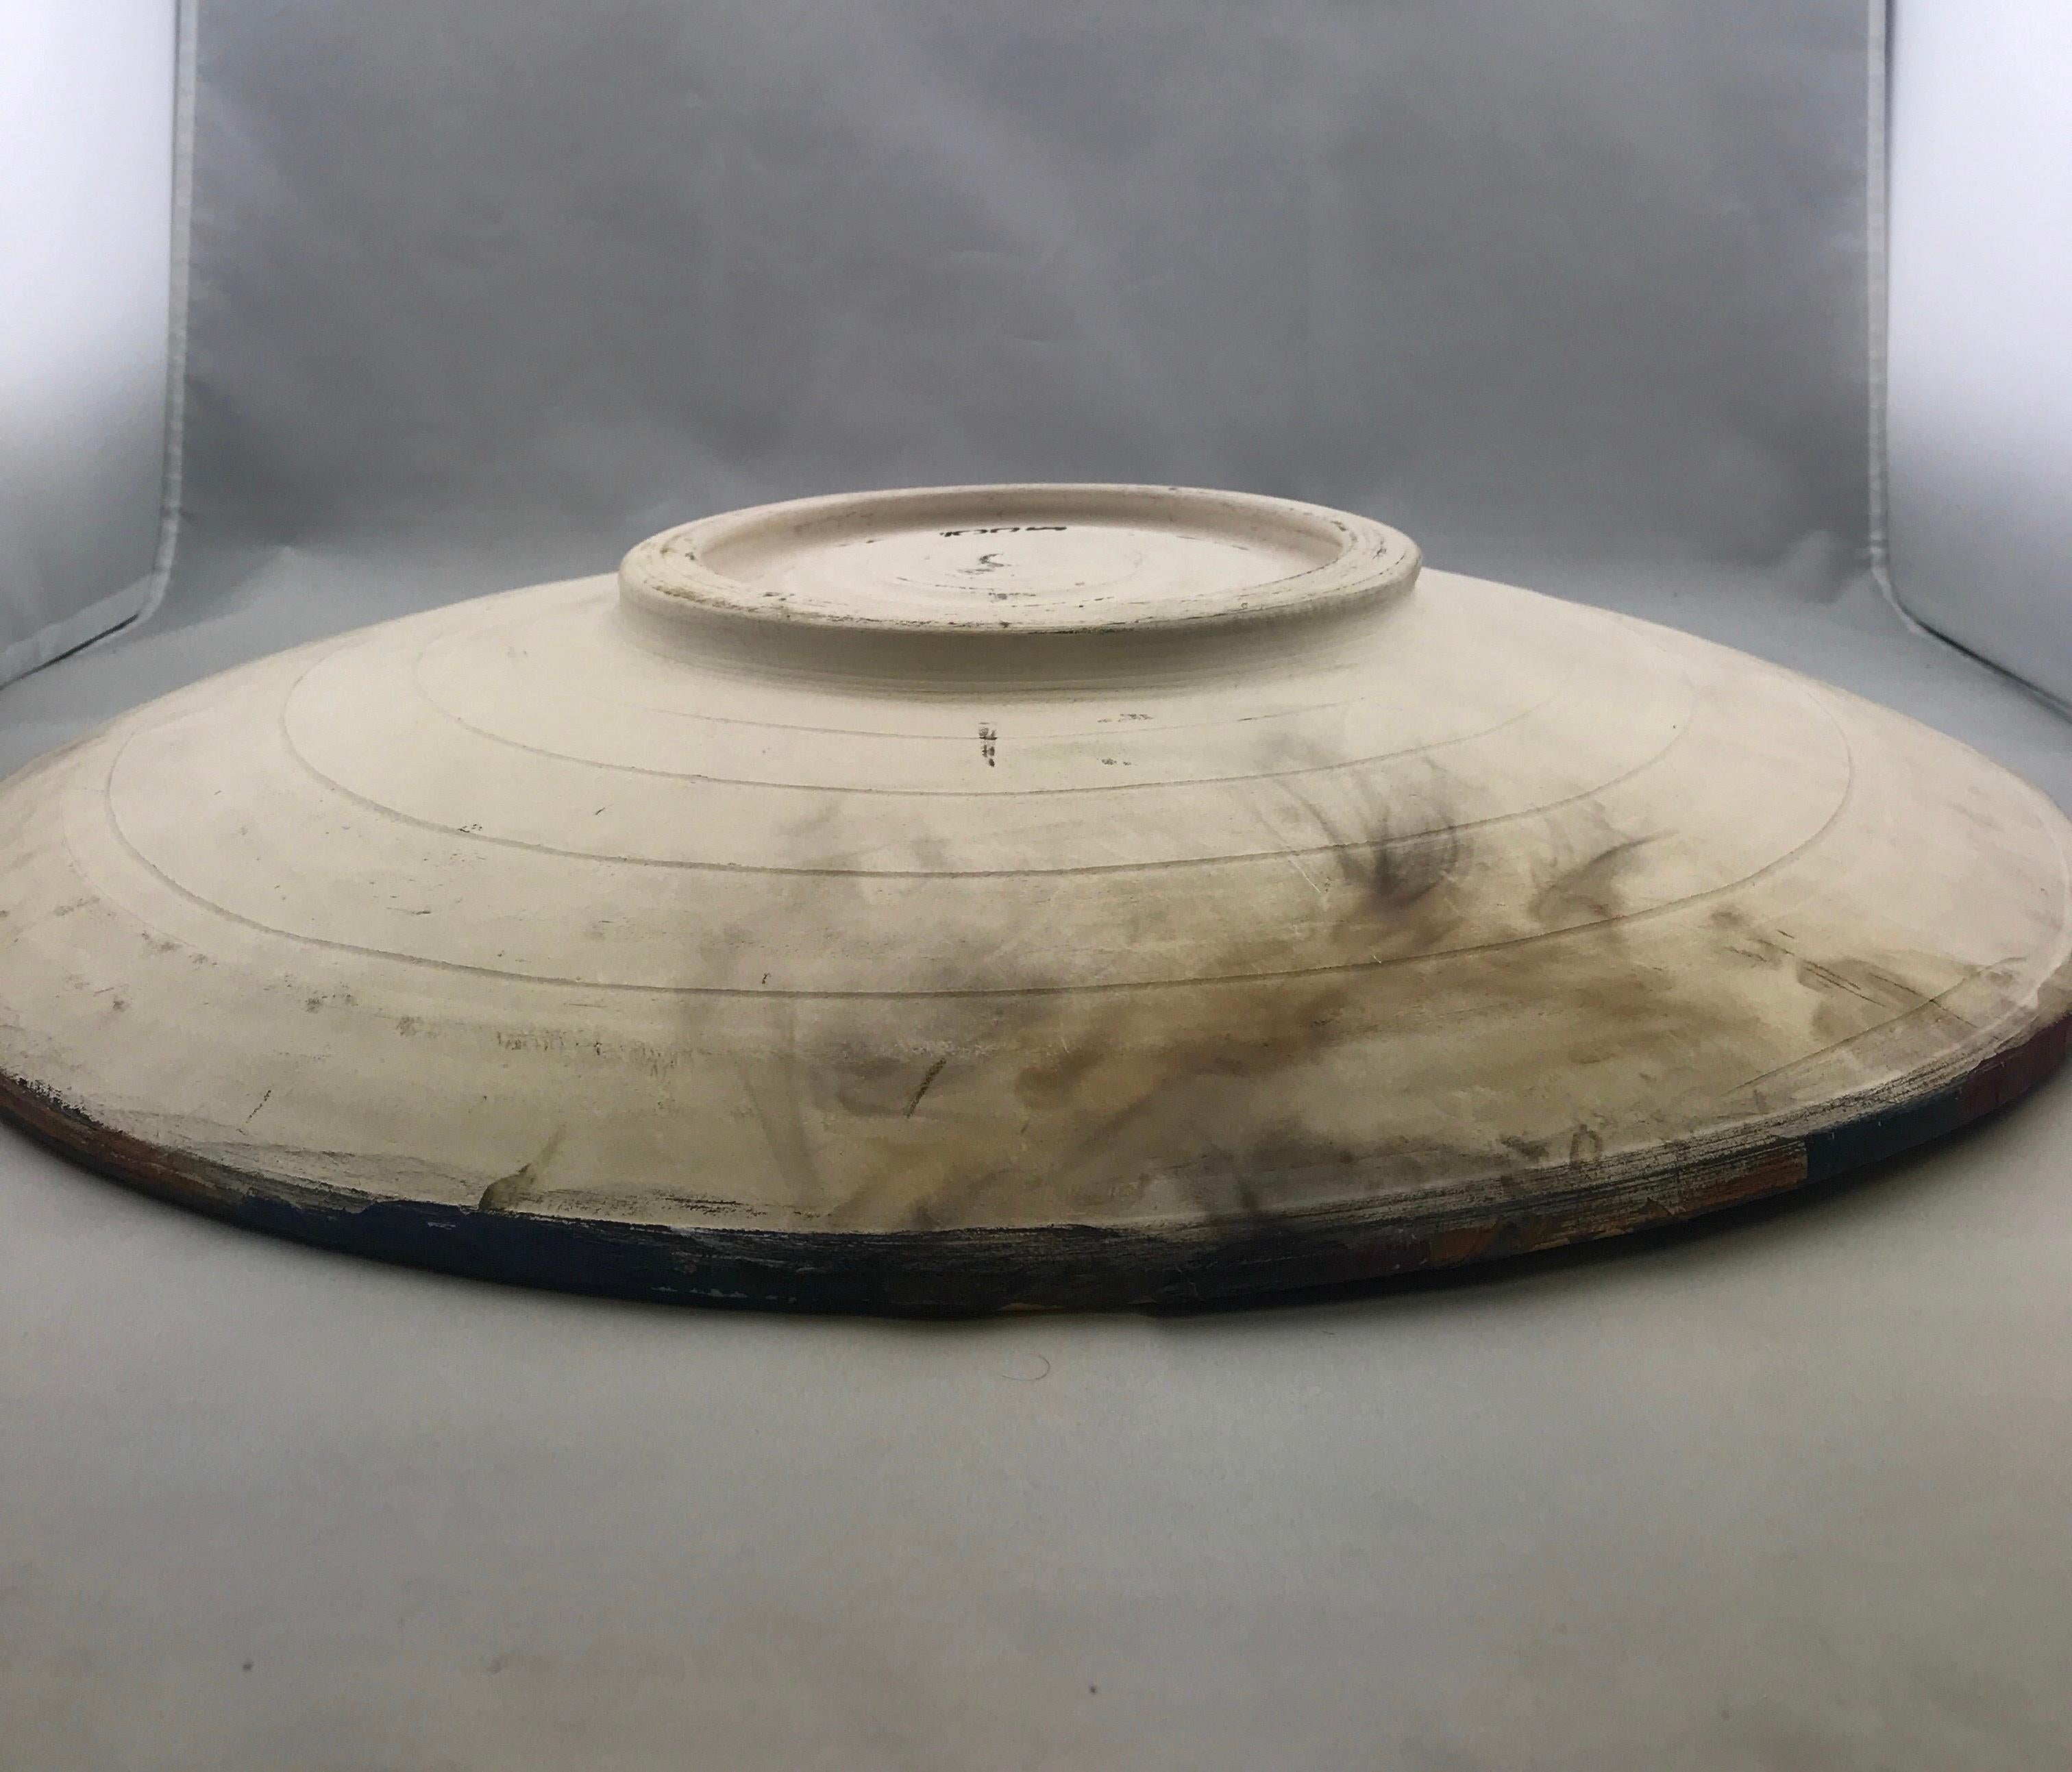 Monumental Ceramic Platter by Robert Carlson, Signed and Dated 1993 For Sale 8